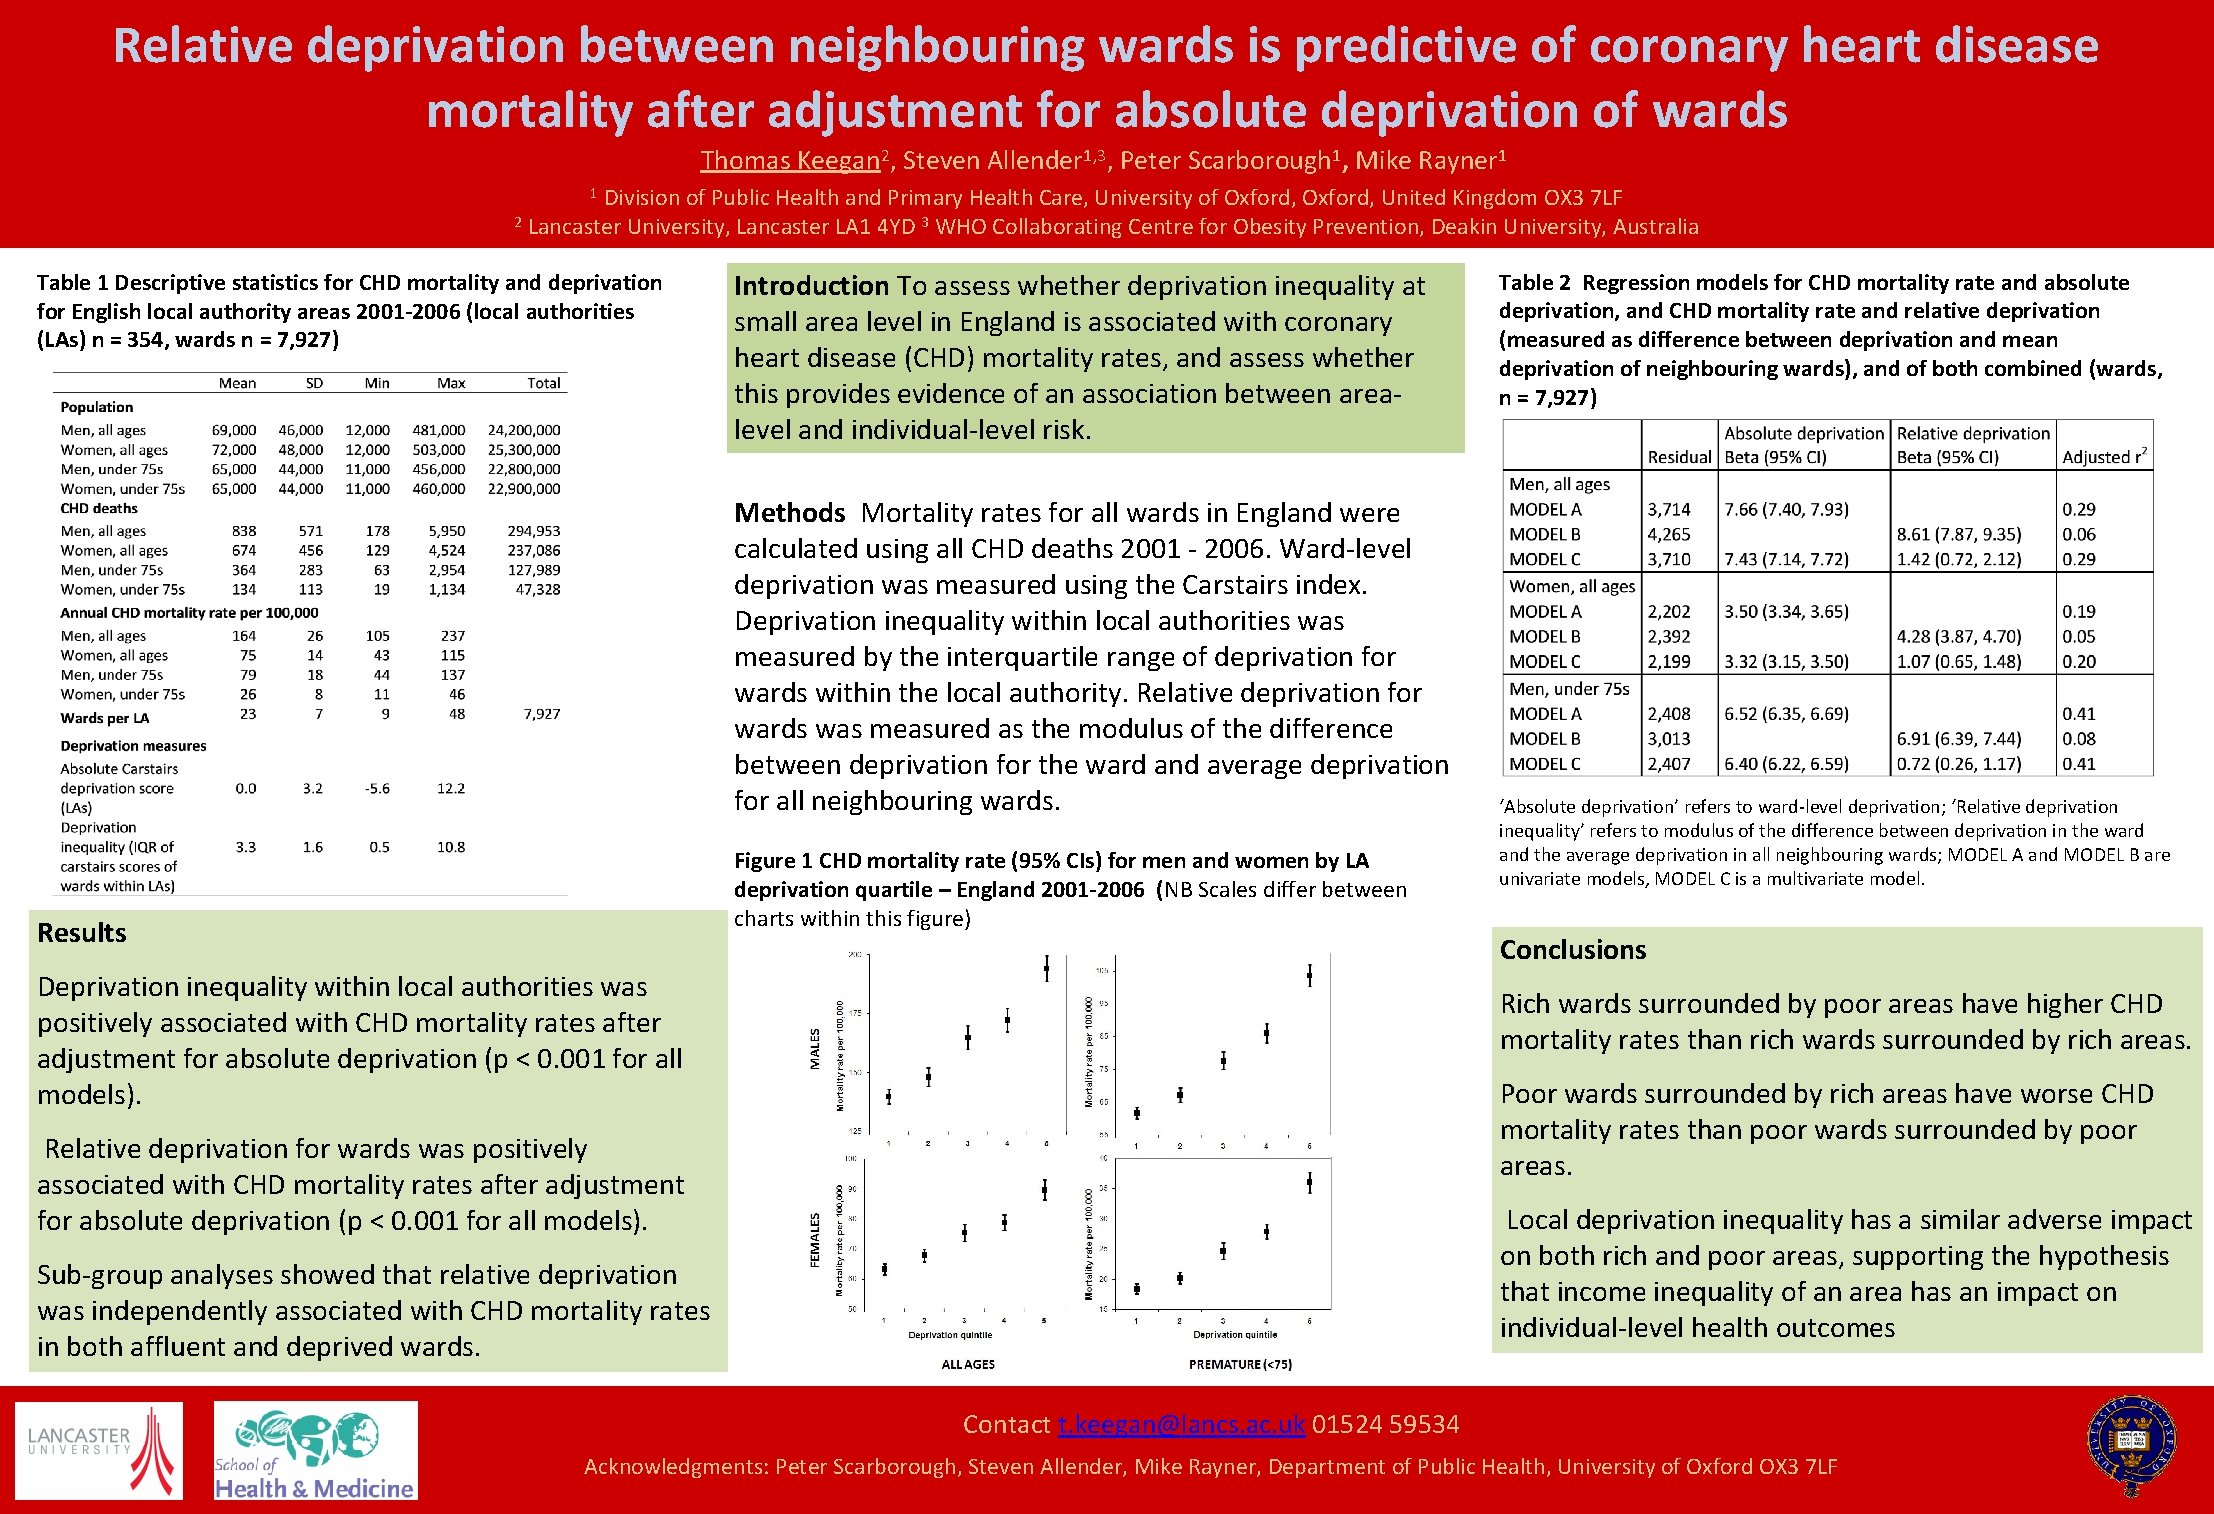 Relative deprivation between neighbouring wards is predictive of coronary heart disease mortality after adjustment